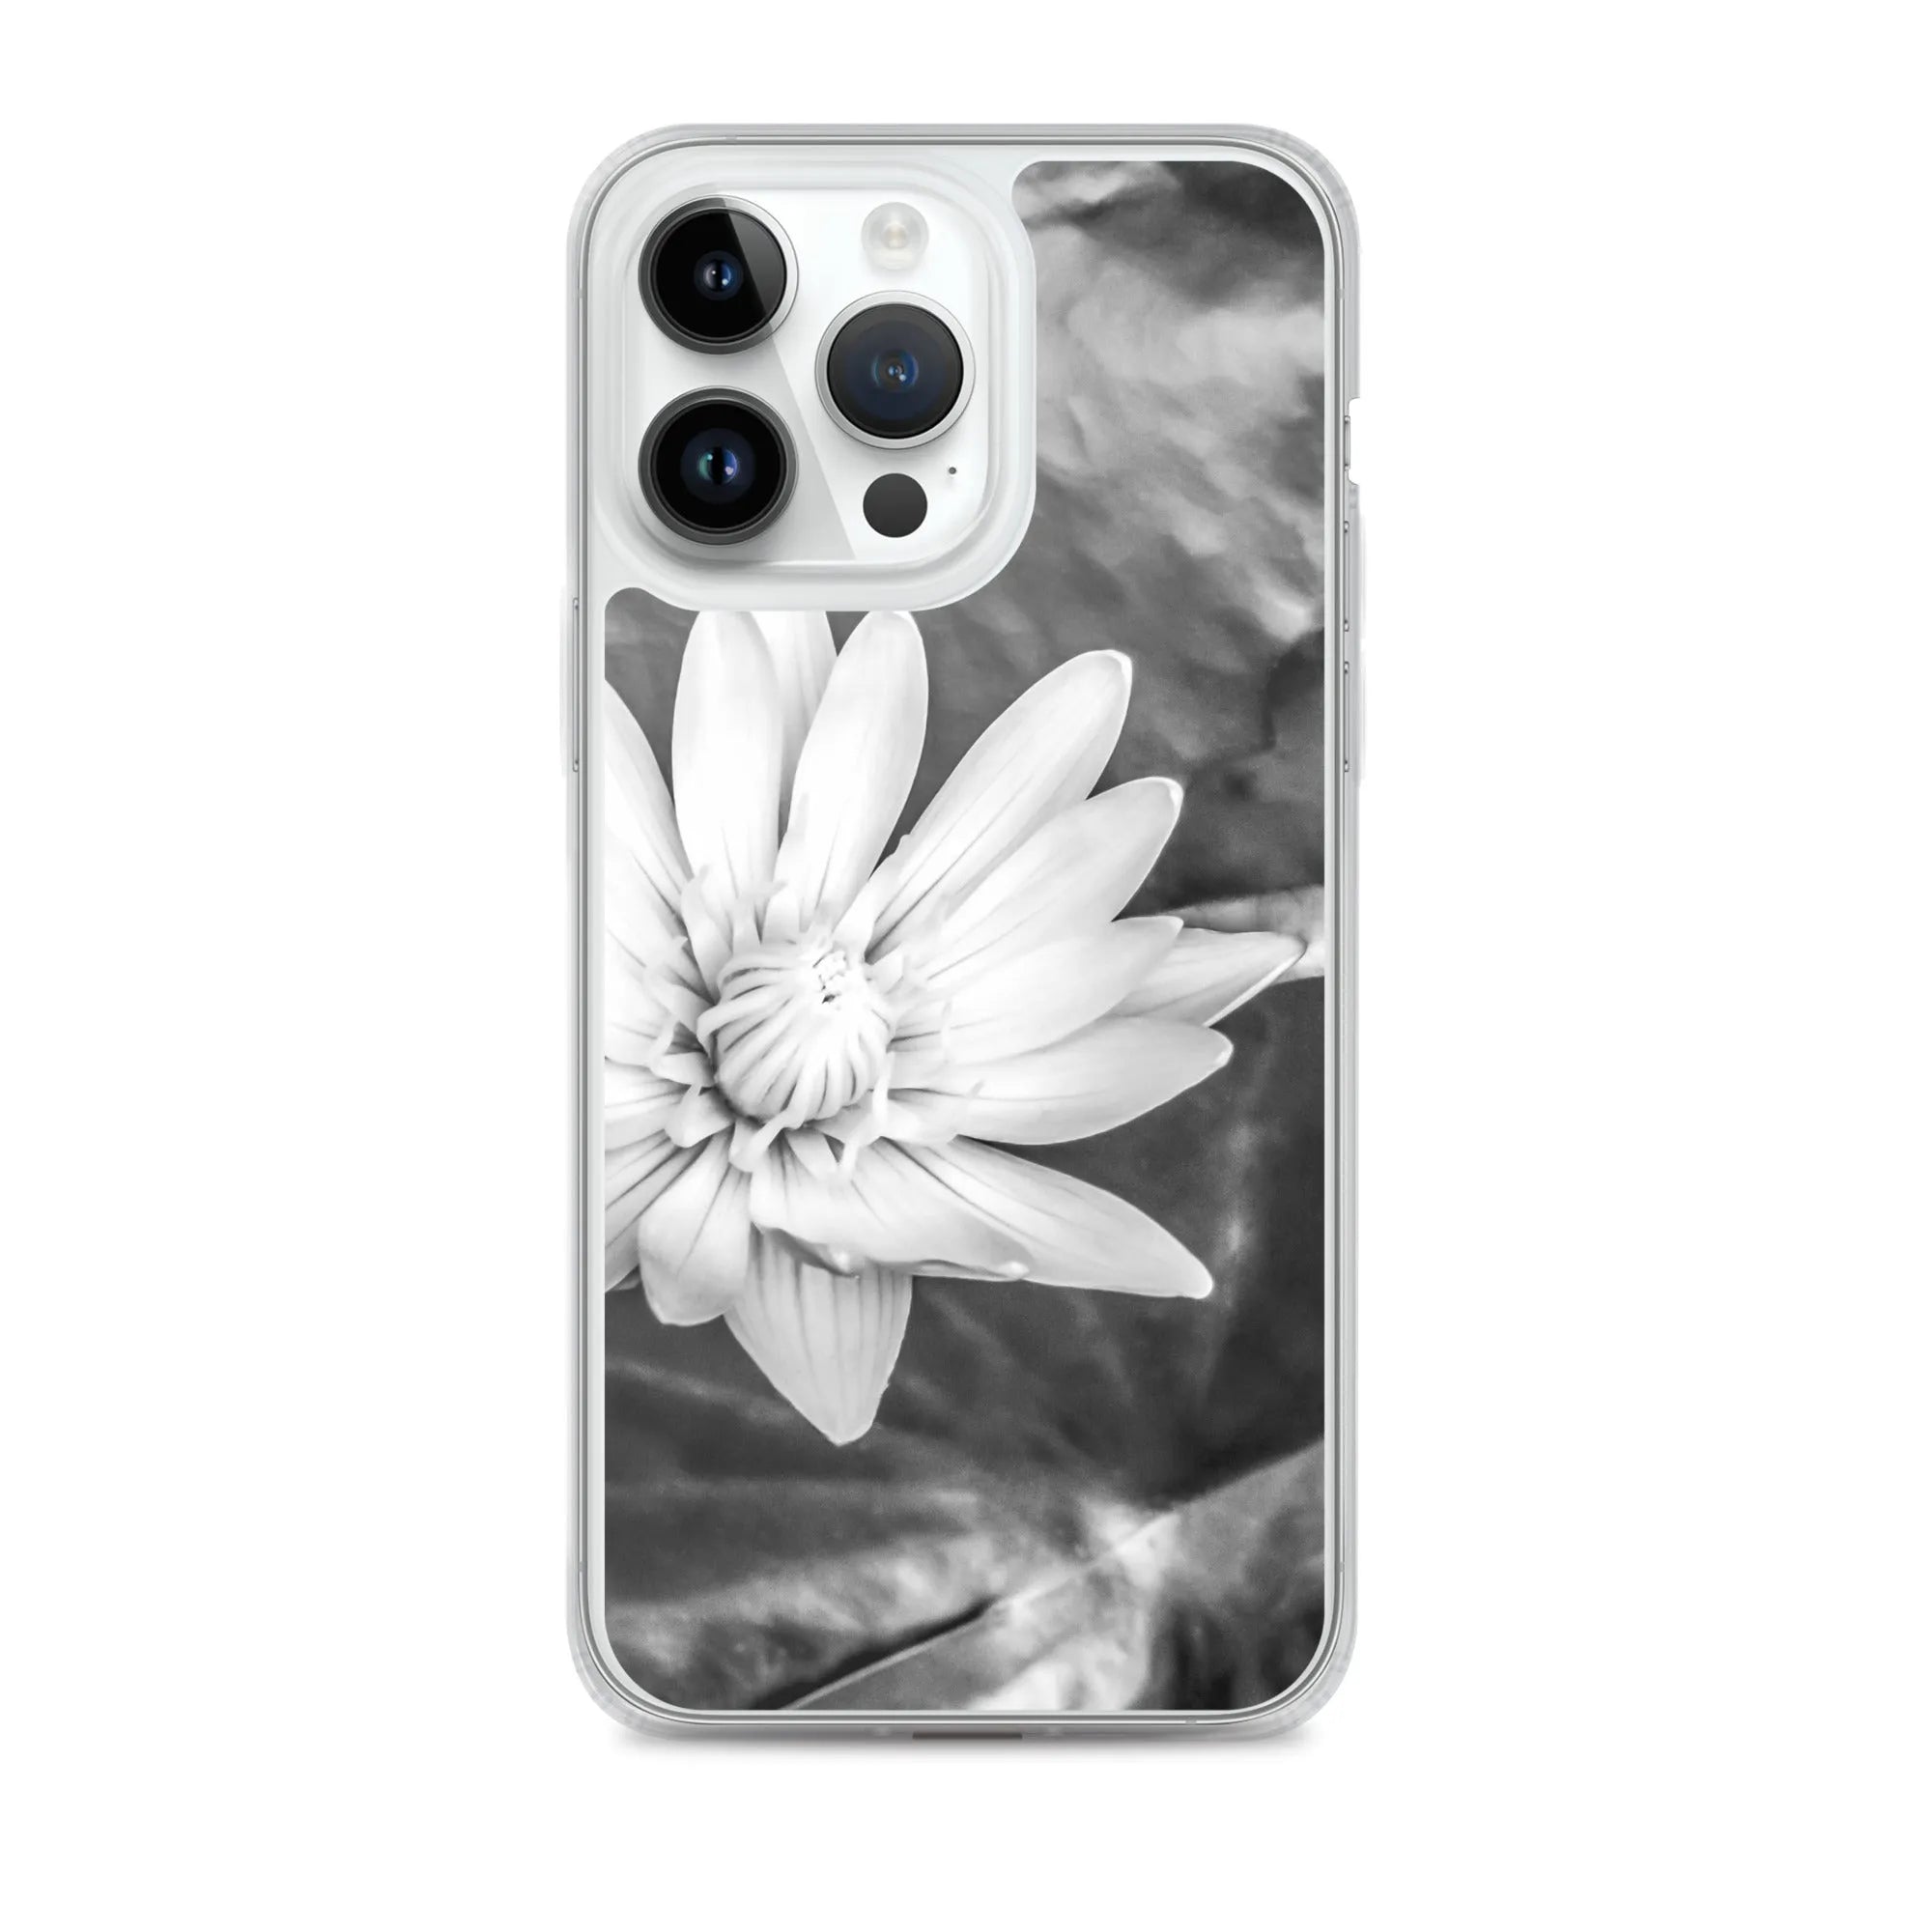 Breakthrough Floral Iphone Case - Black And White - Iphone 14 Pro Max - Mobile Phone Cases - Aesthetic Art